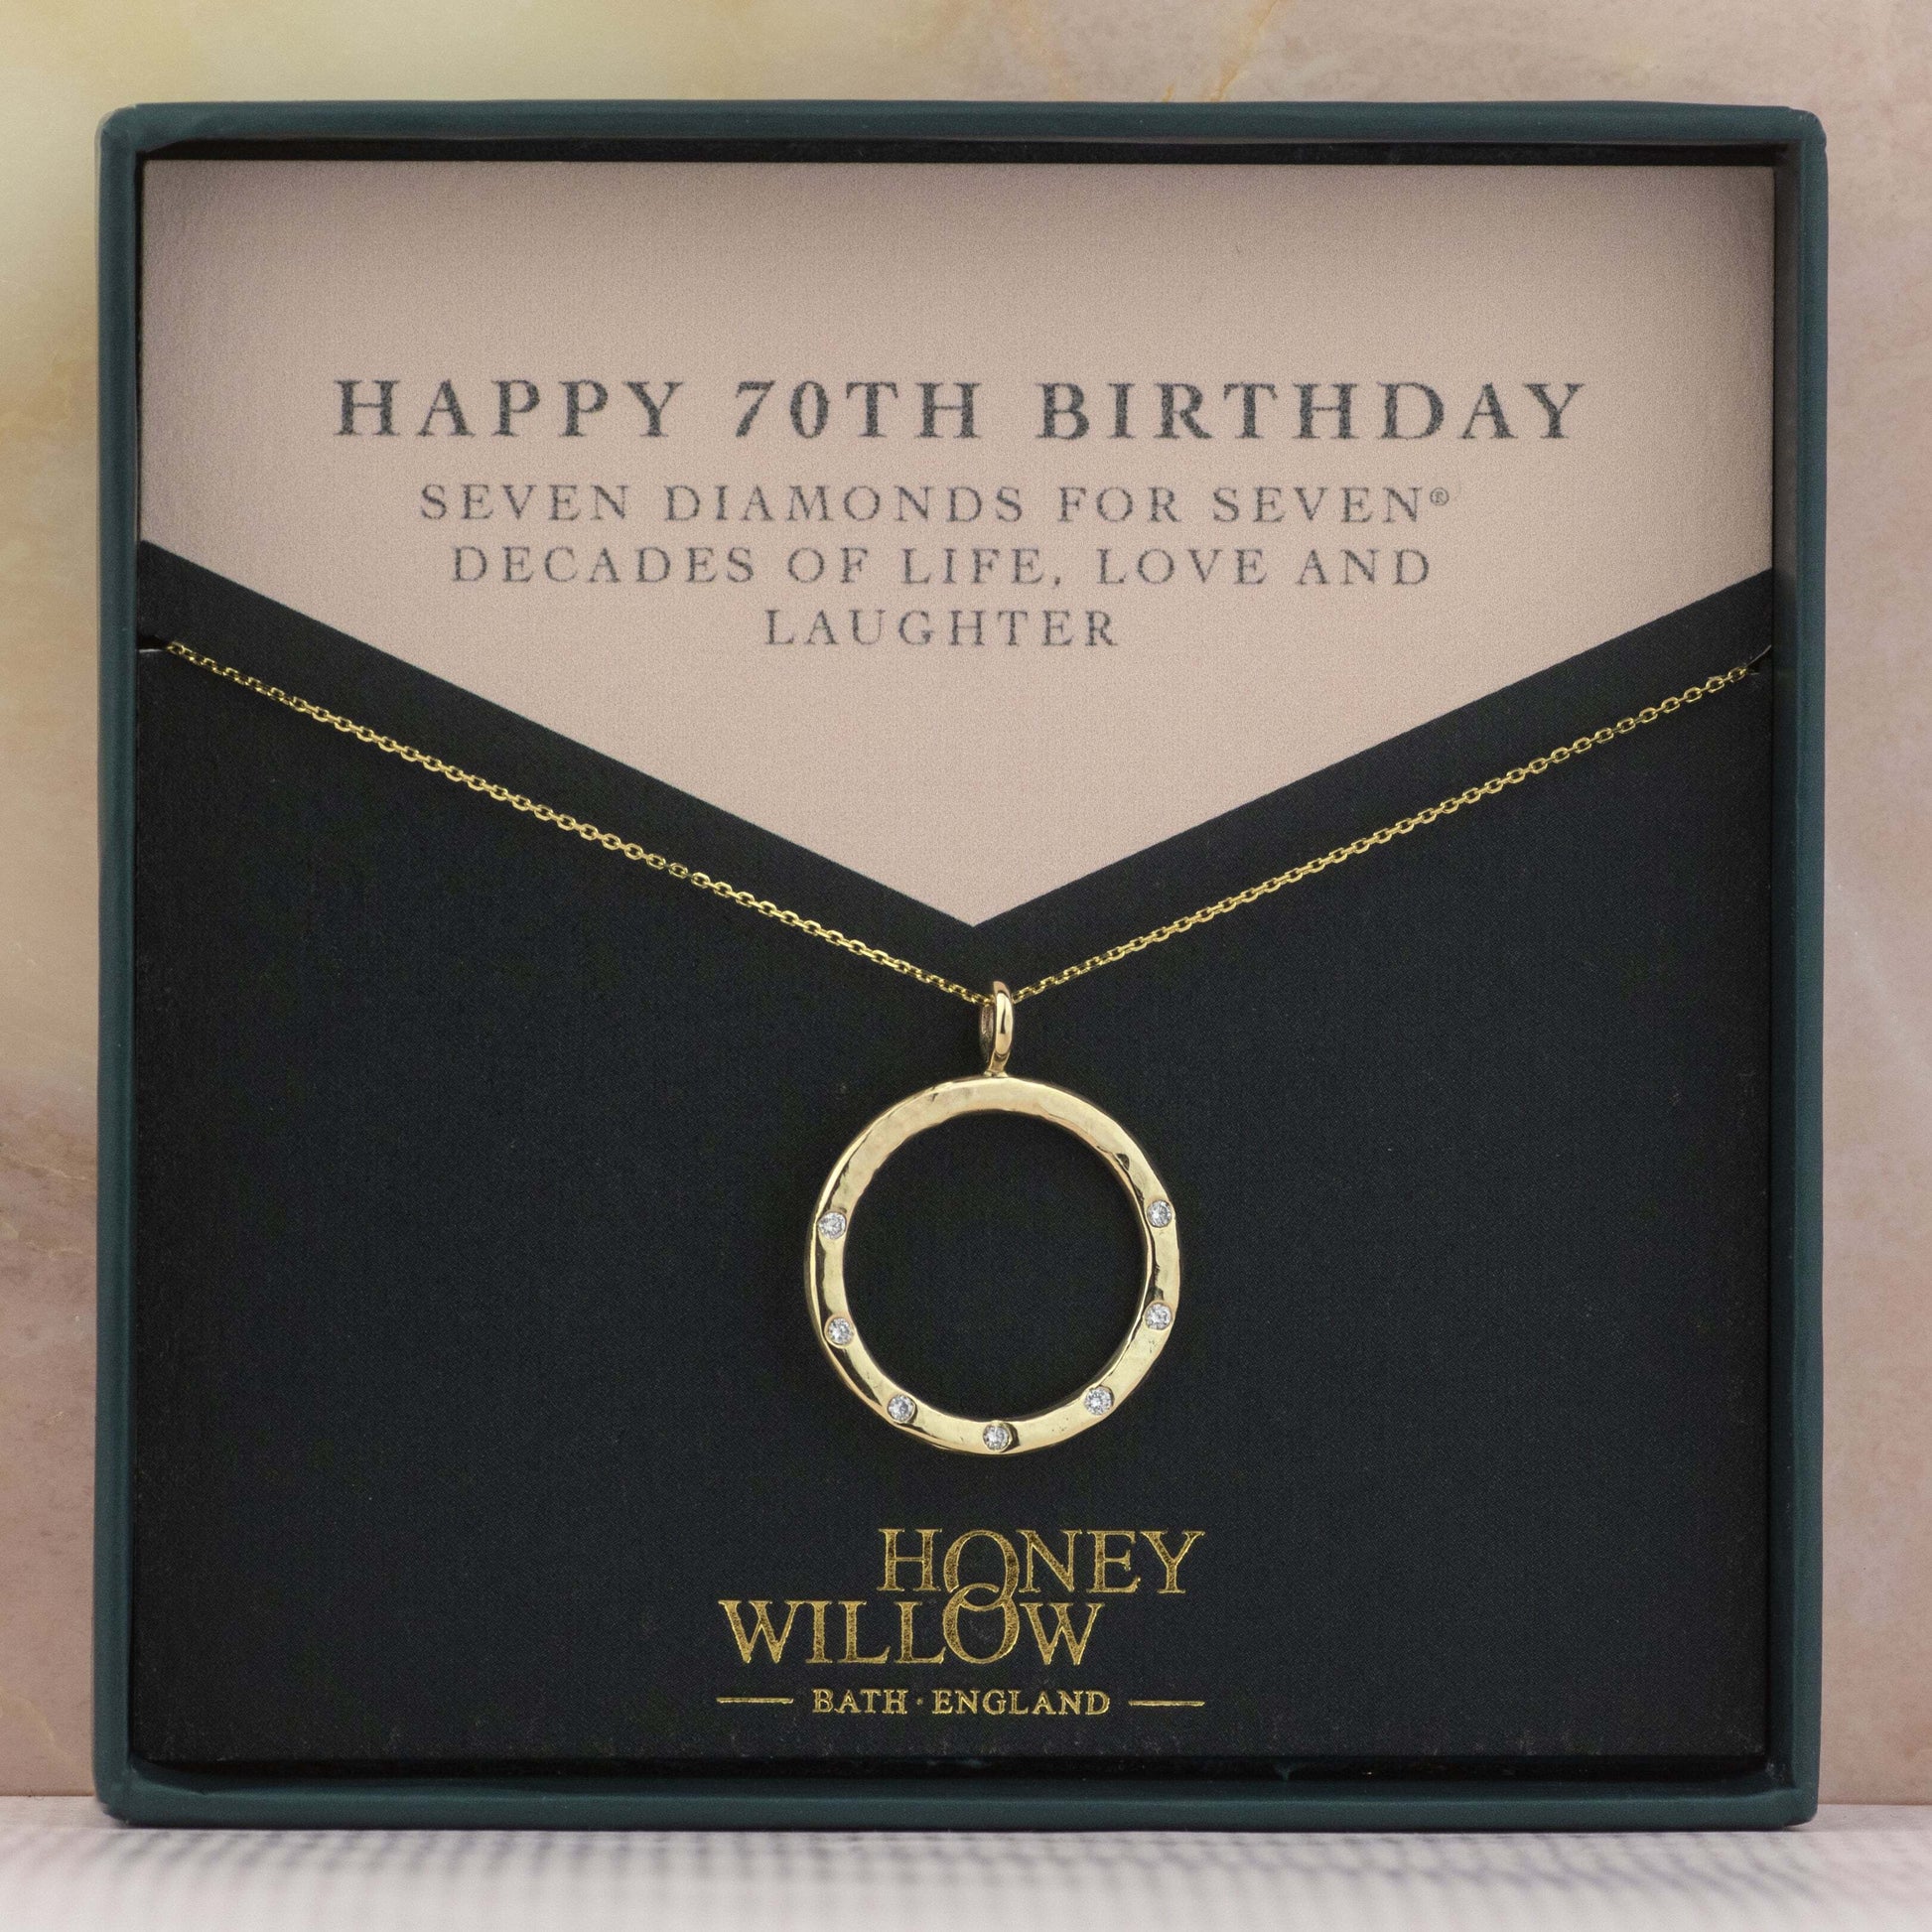 70th Birthday Gift - Recycled 9kt Gold Diamond Halo Necklace - 7 Diamonds for 7® Decades